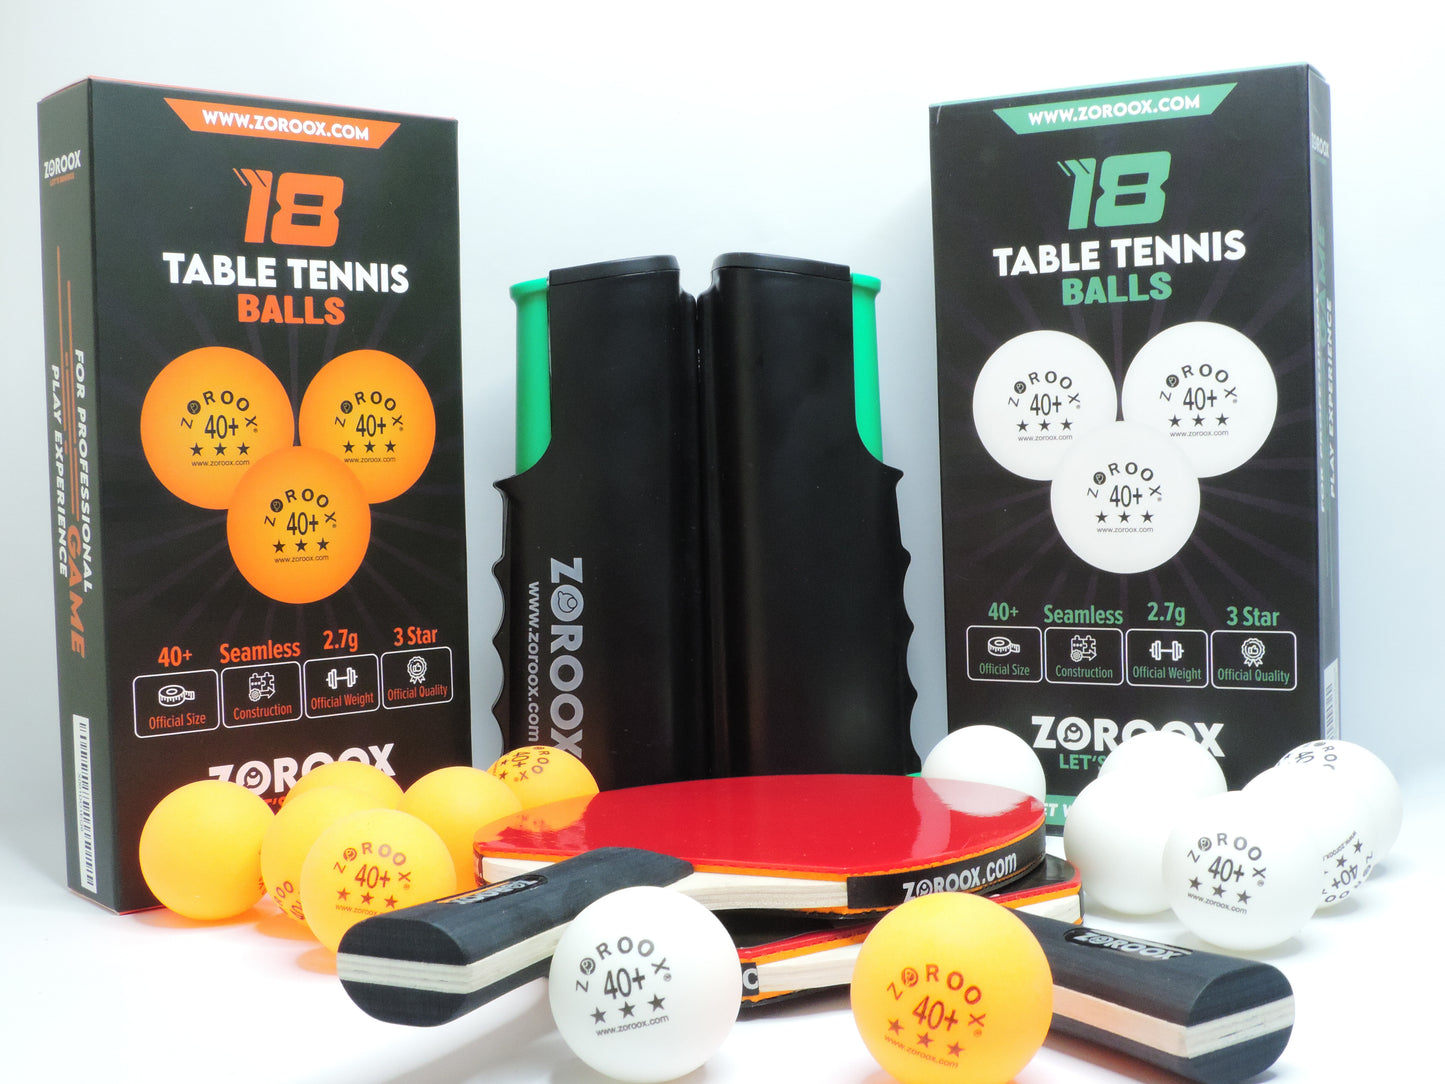 ZOROOX Professional Table Tennis Balls (3 Star) - White | Orange - Pack Of 18, 40+ ABS 2.7G 40 mm